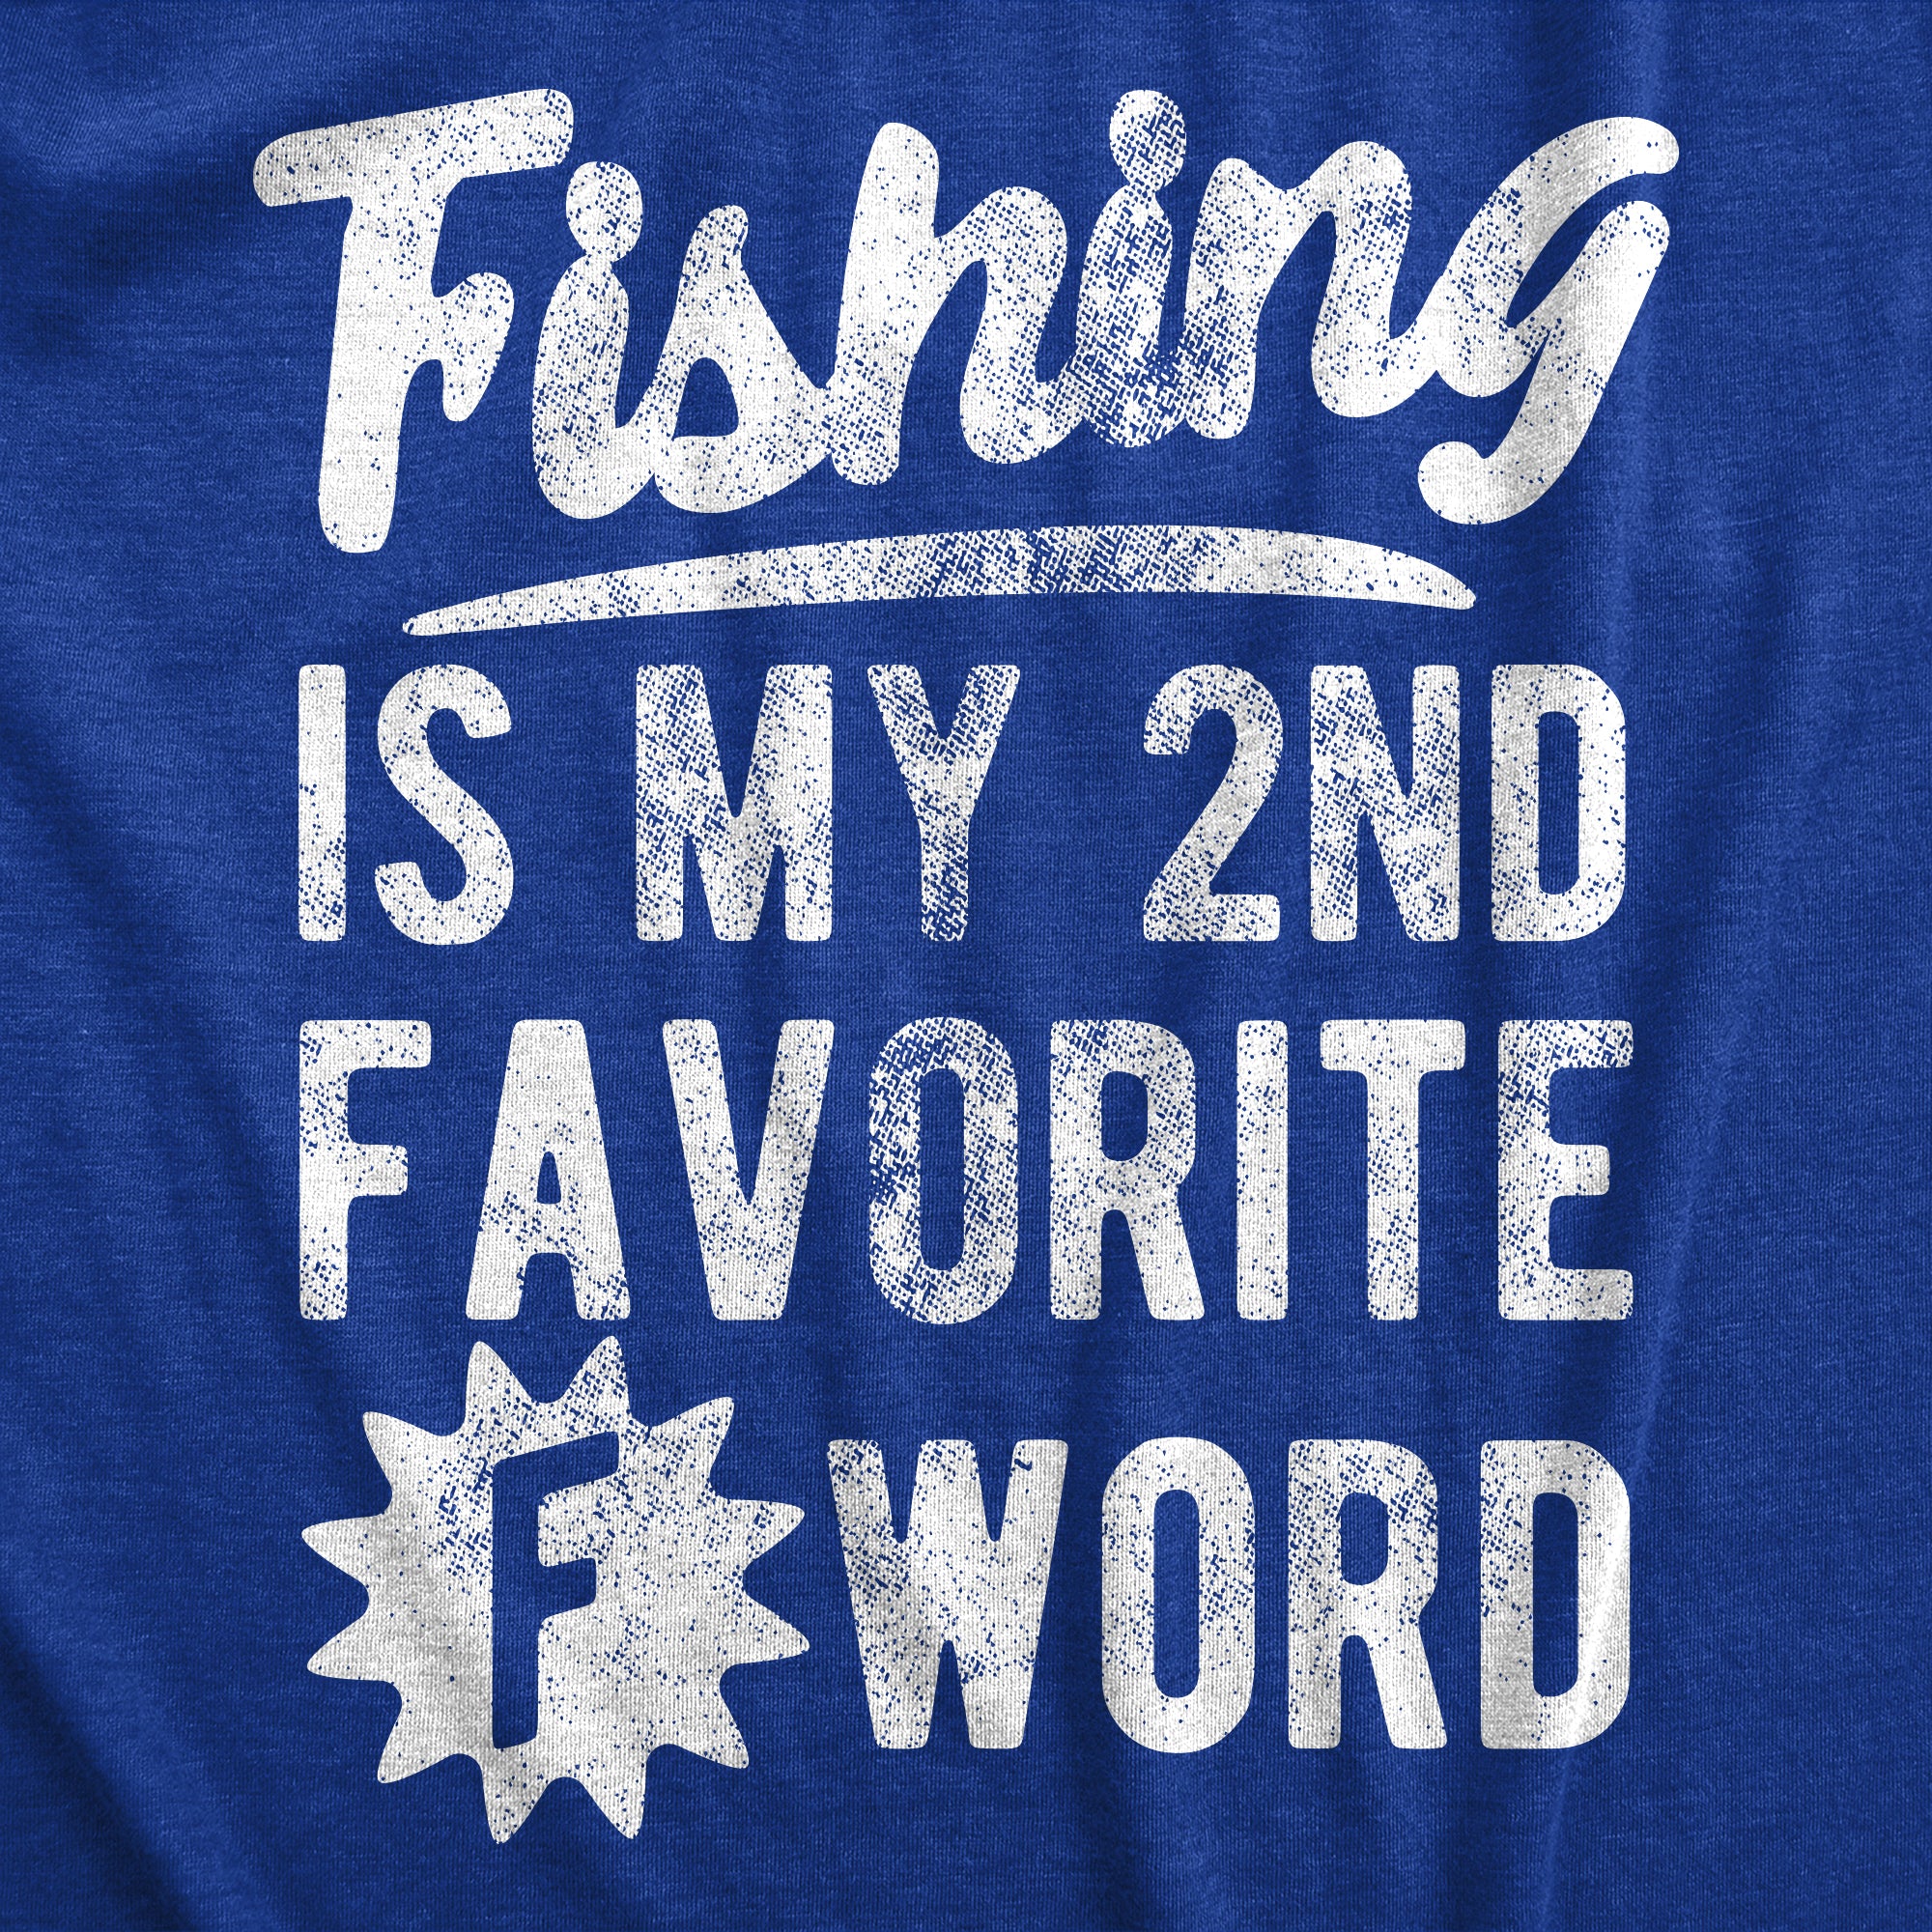 Funny Heather Royal - FWORD Fishing Is My Second Favorite F Word Mens T Shirt Nerdy Fishing sarcastic Tee